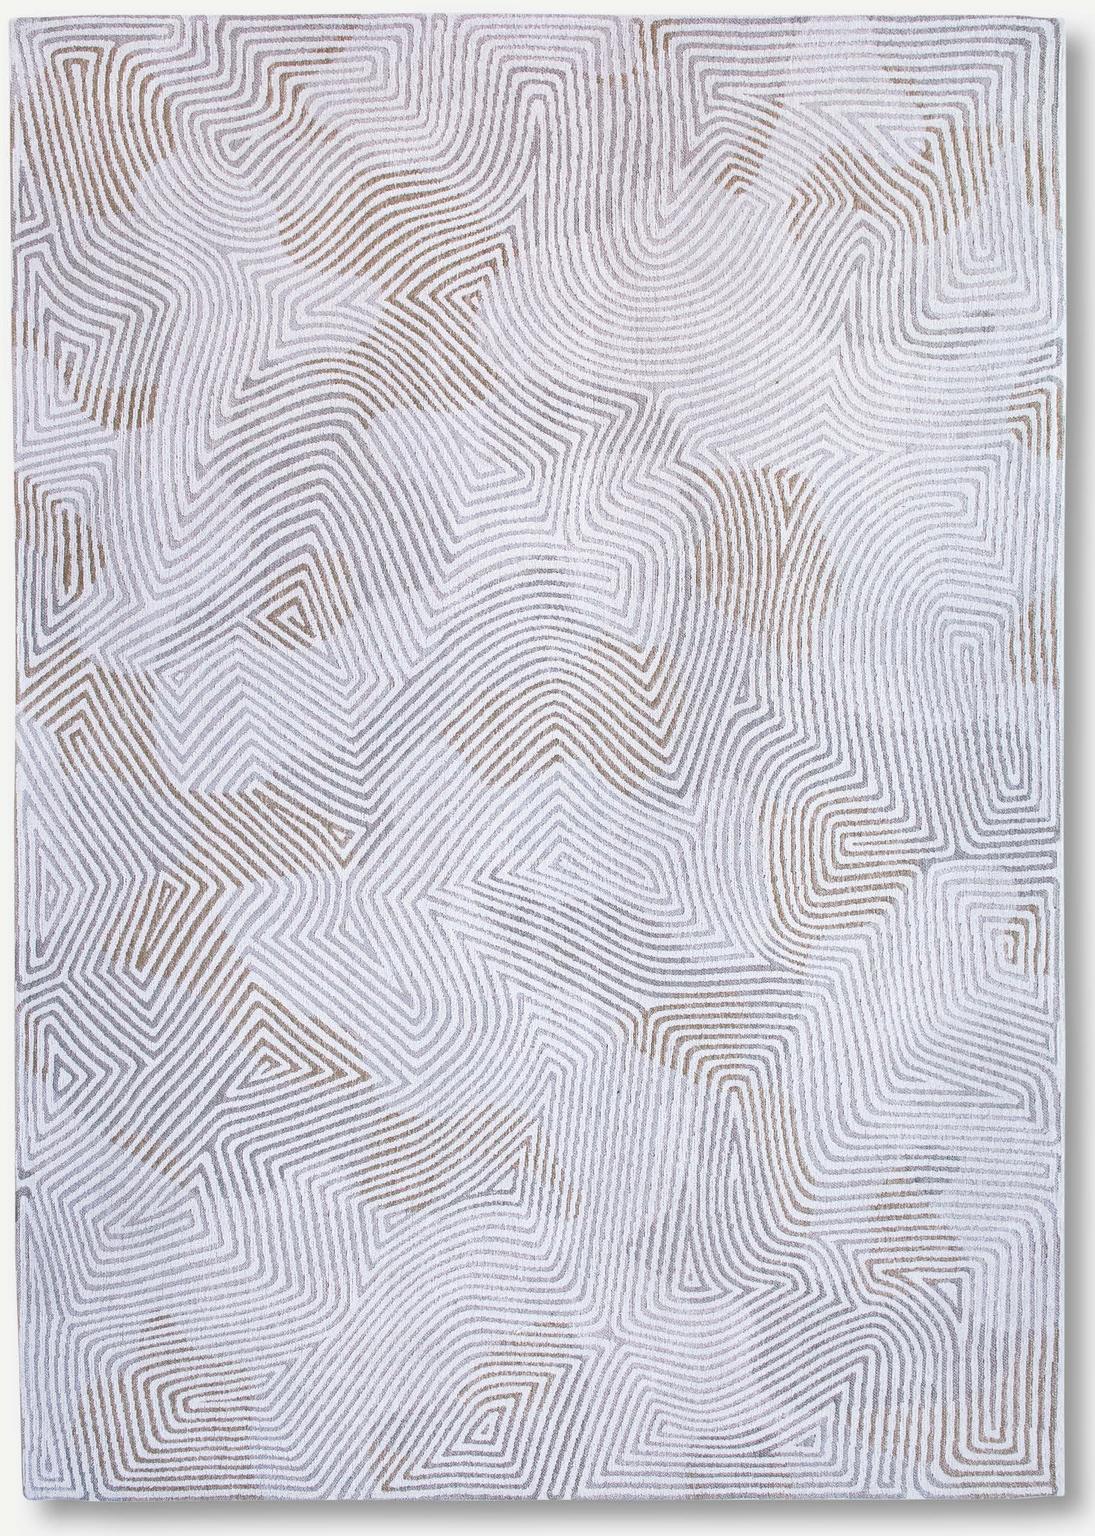 White Flatwoven Rug ☞ Size: 4' 7" x 6' 7" (140 x 200 cm)